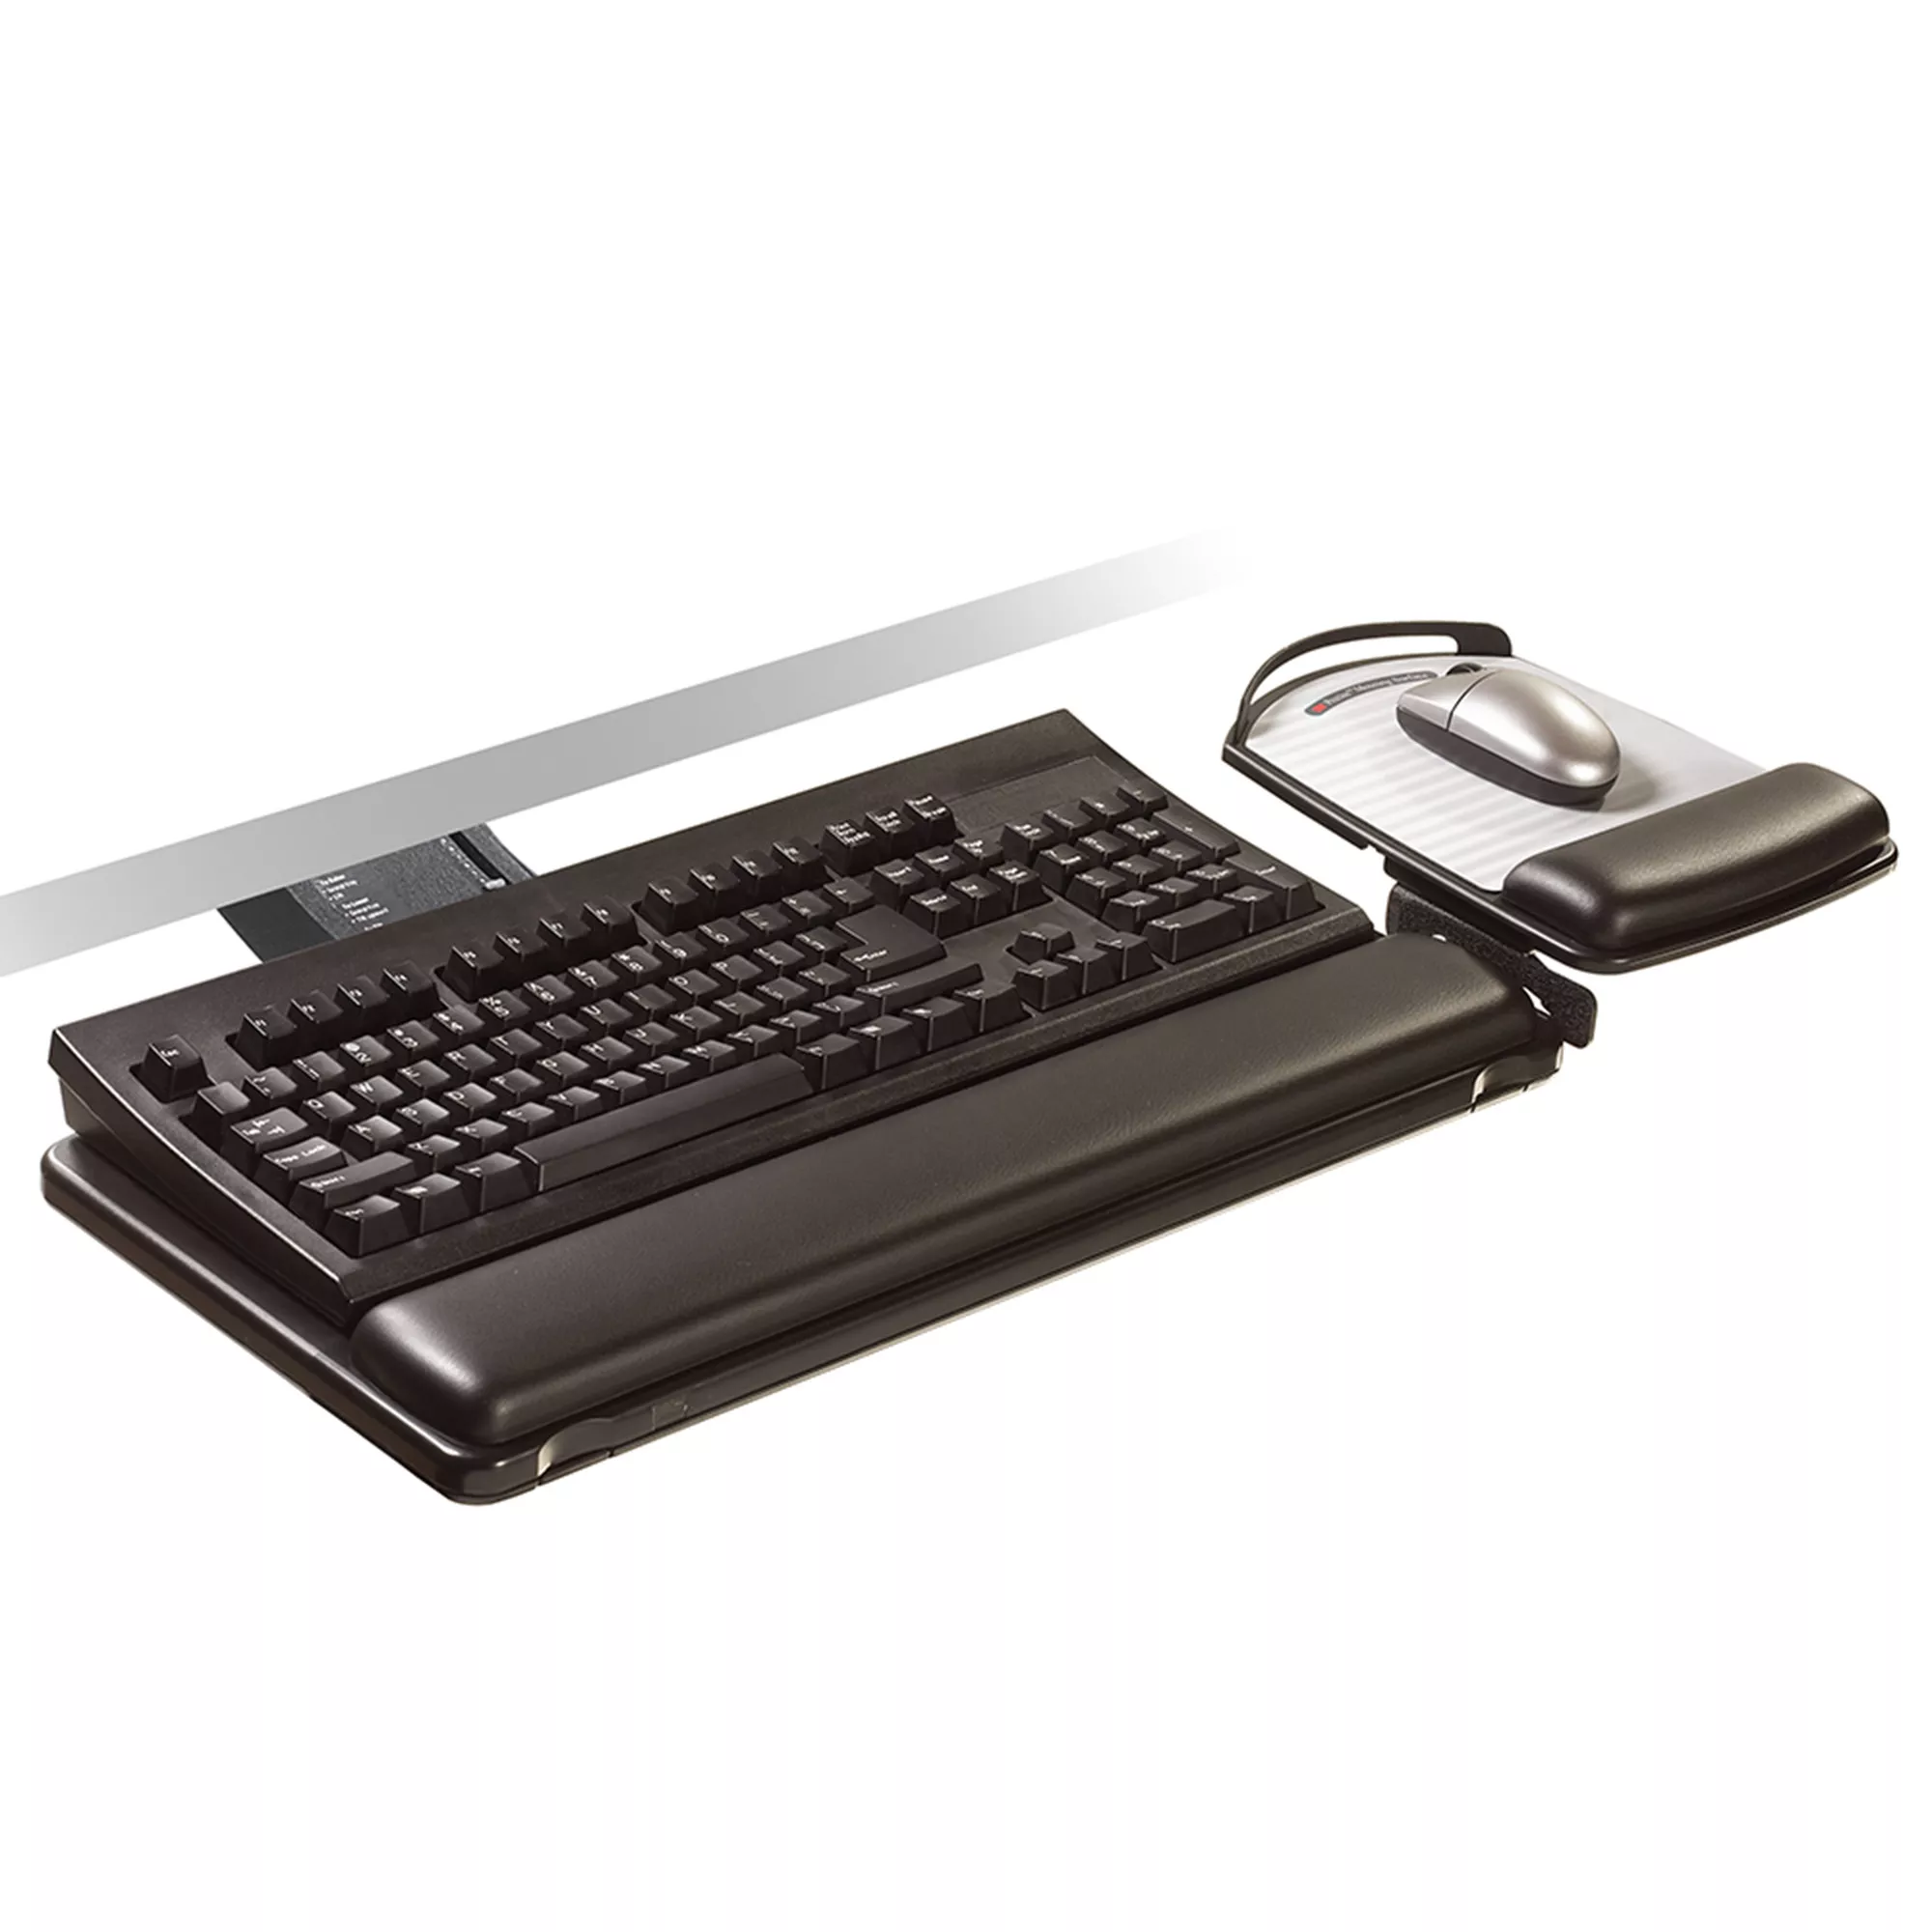 3M™ Sit/Stand Easy Adjust Keyboard Tray with Adjustable Keyboard and
Mouse Platform, 23 in Track, AKT180LE